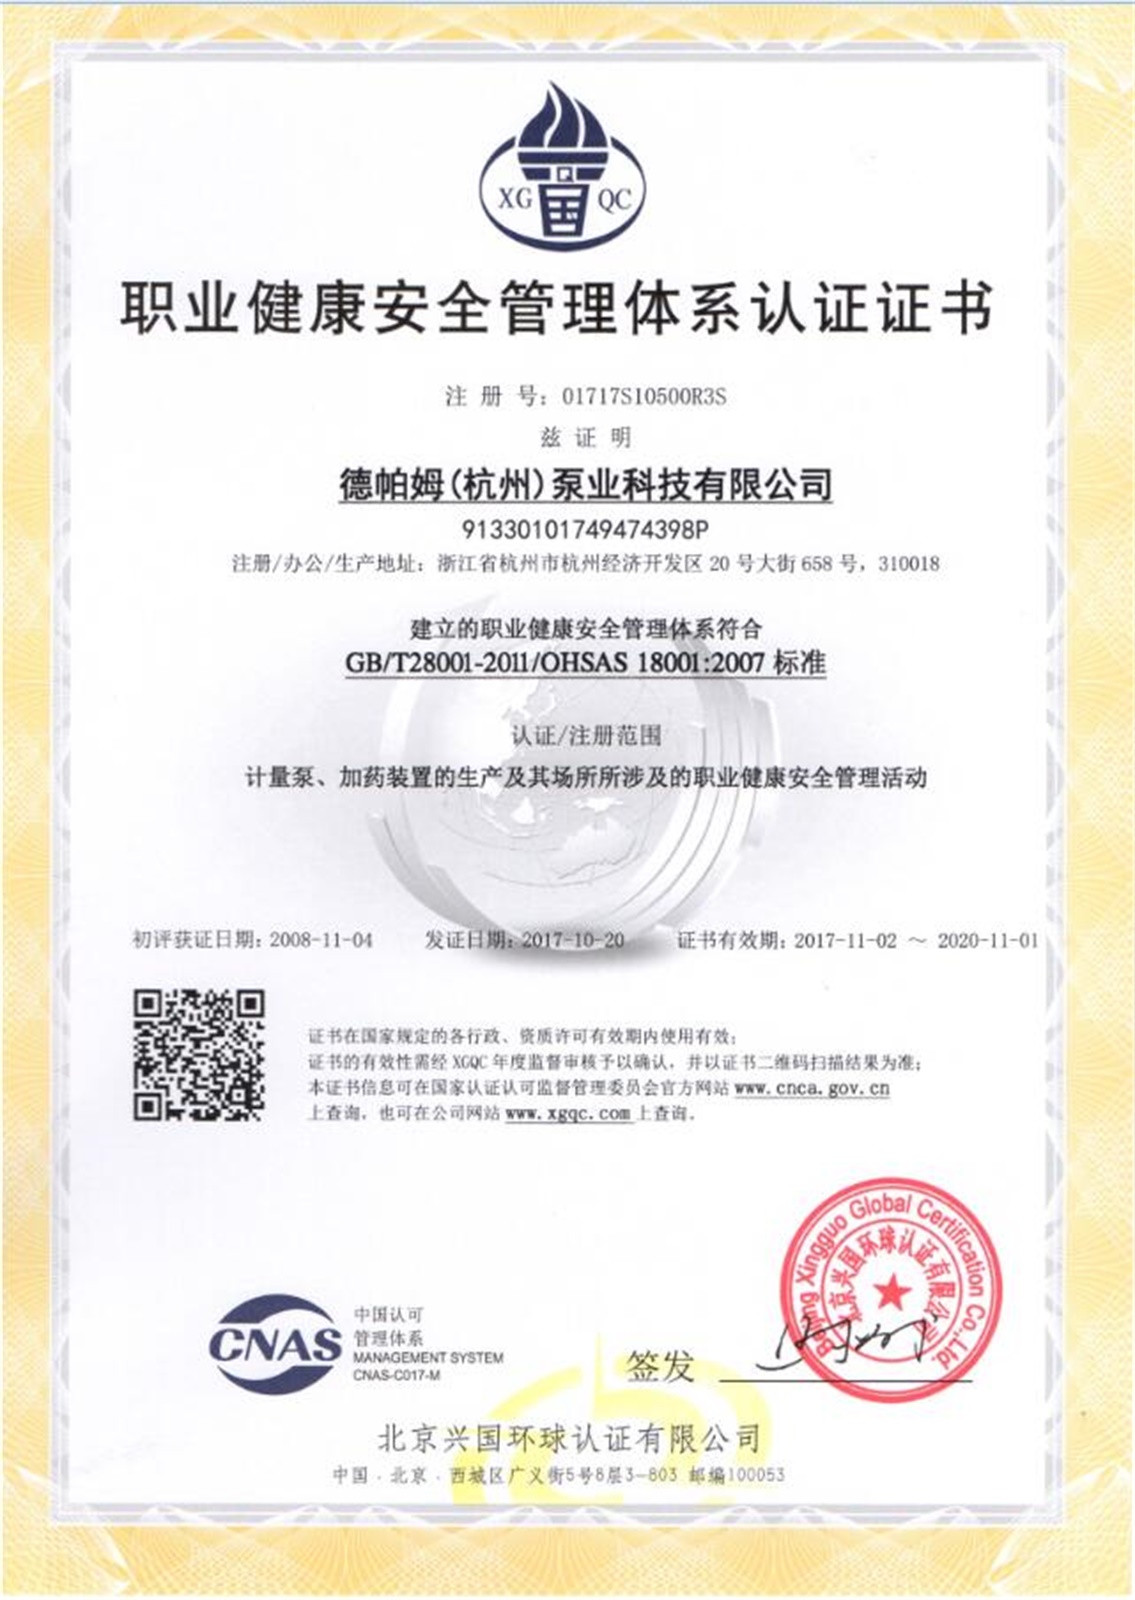 Occupational Health and Safety Management System Certification